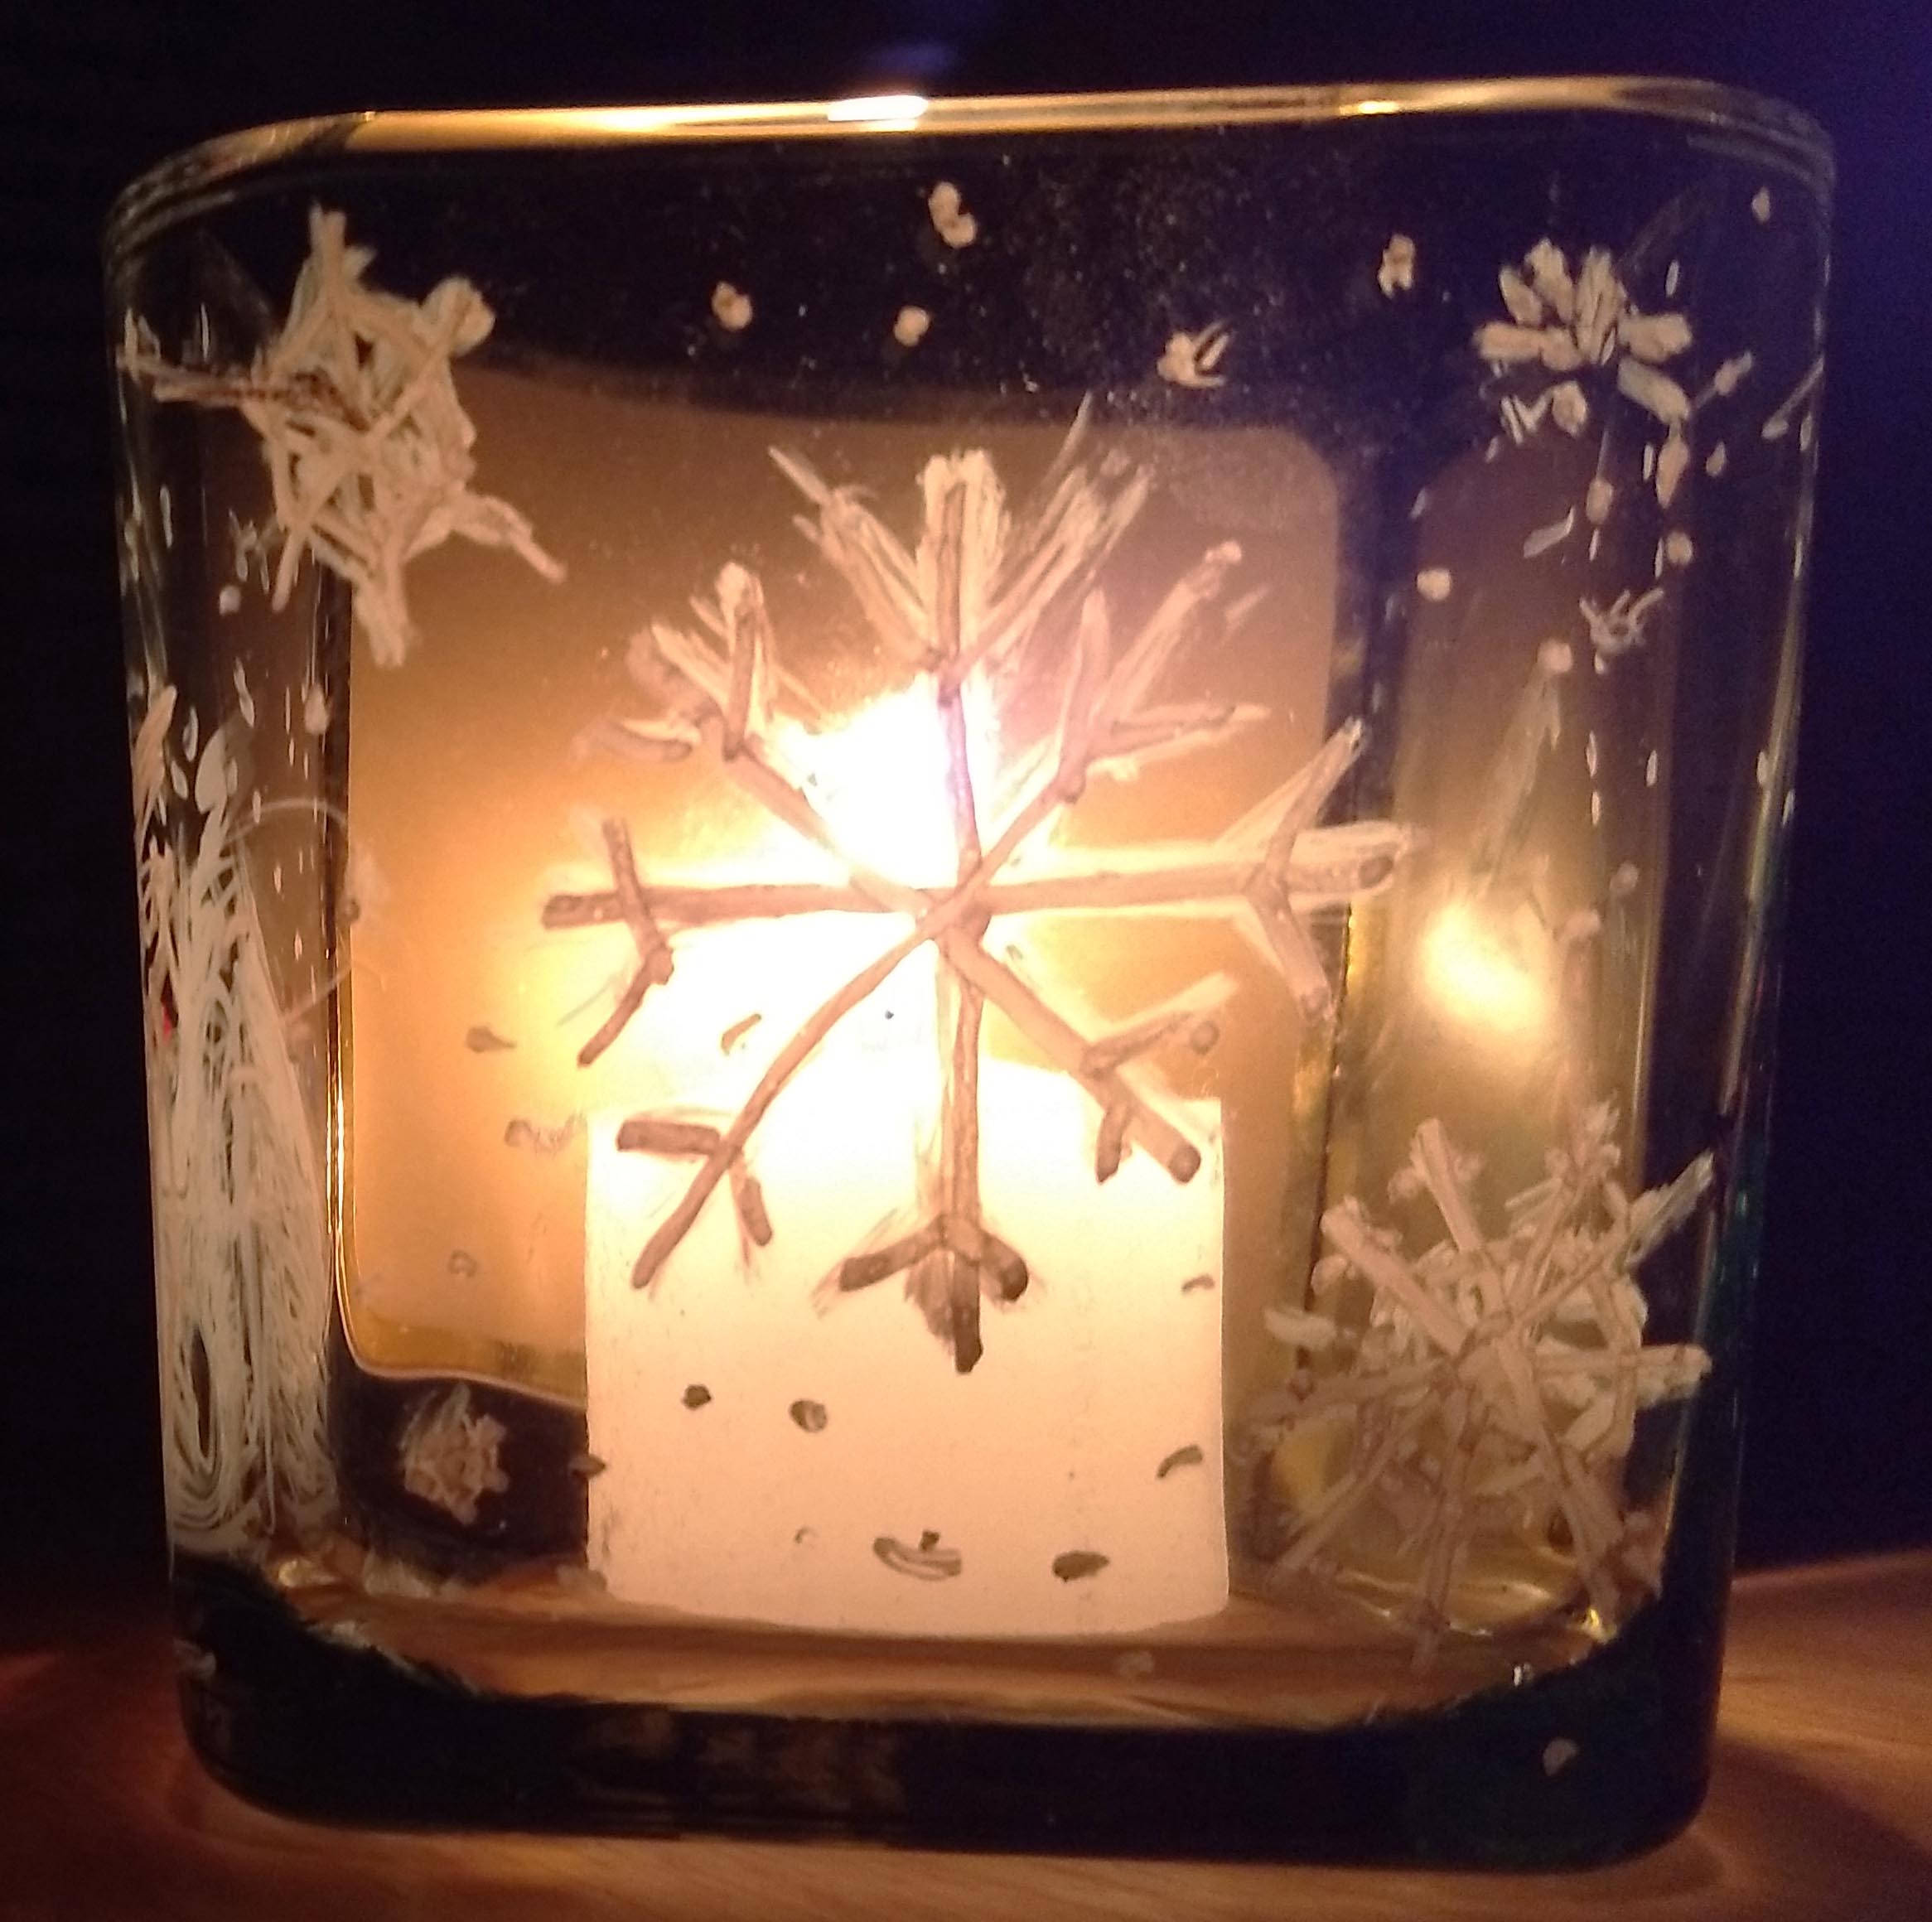 candle shining through glass holder painted with snowflakes